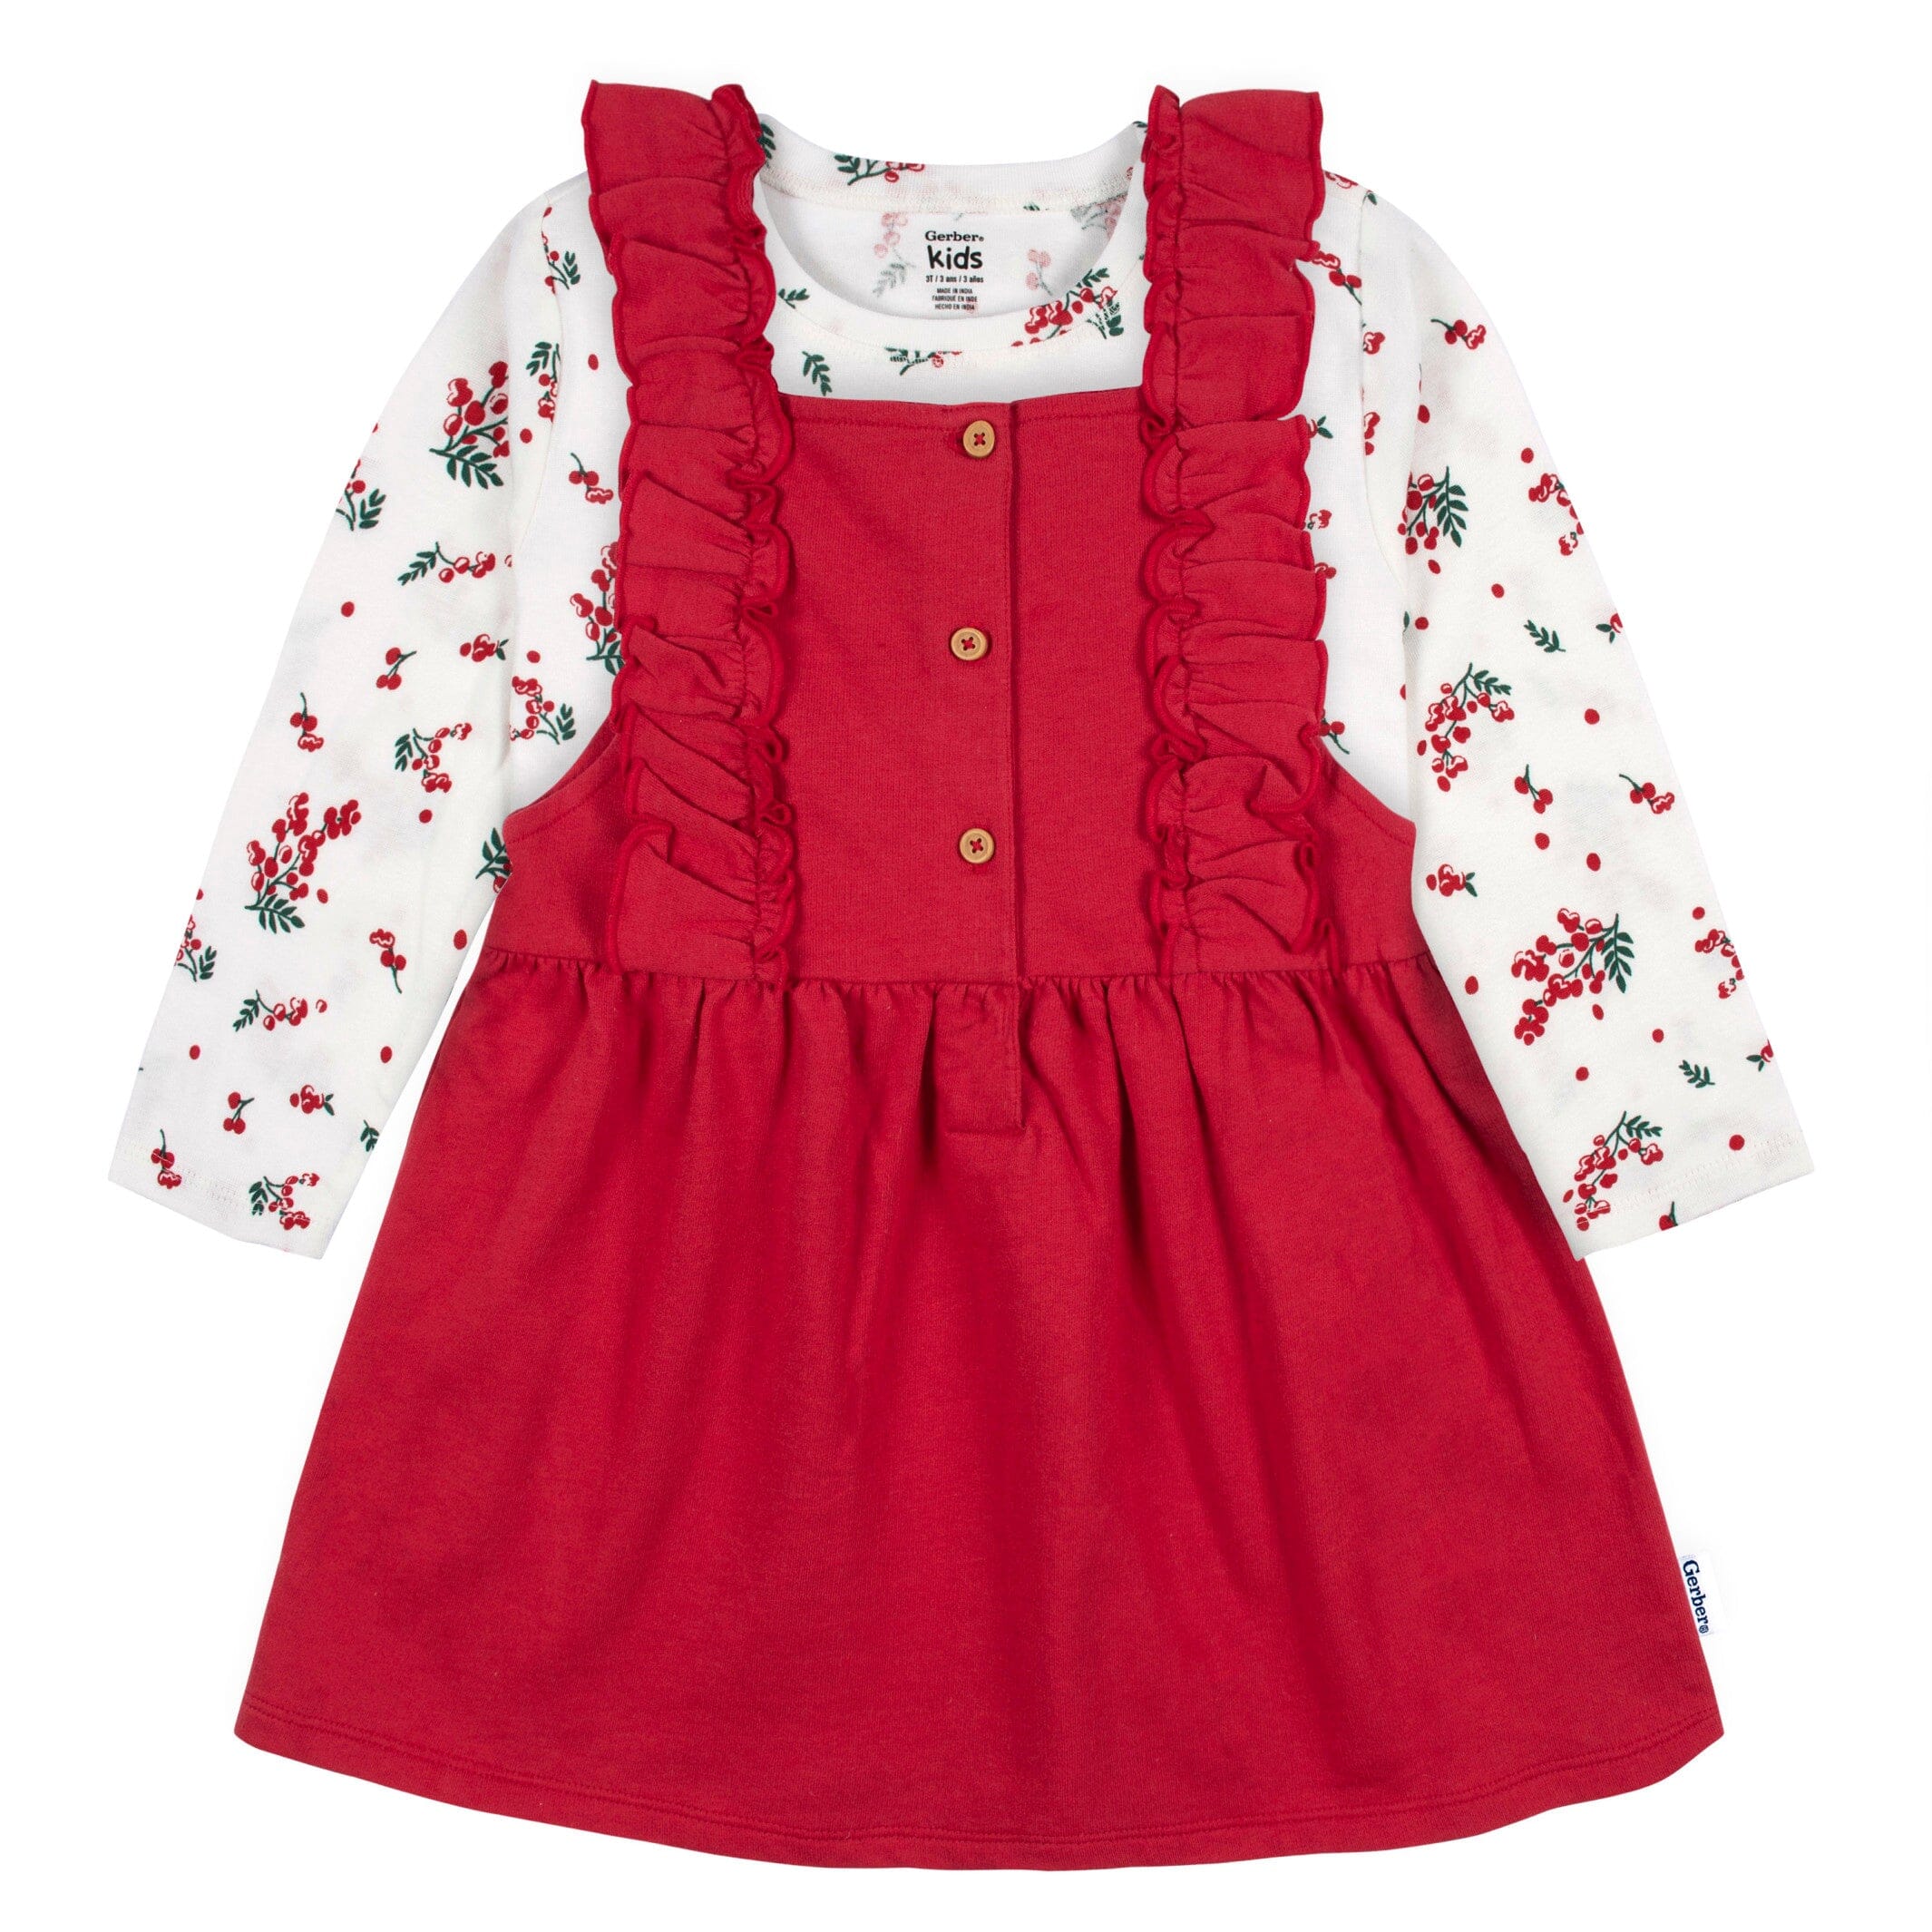 2-Piece Infant & Toddler Girls Red Holly Berries Jumper & Top Set ...